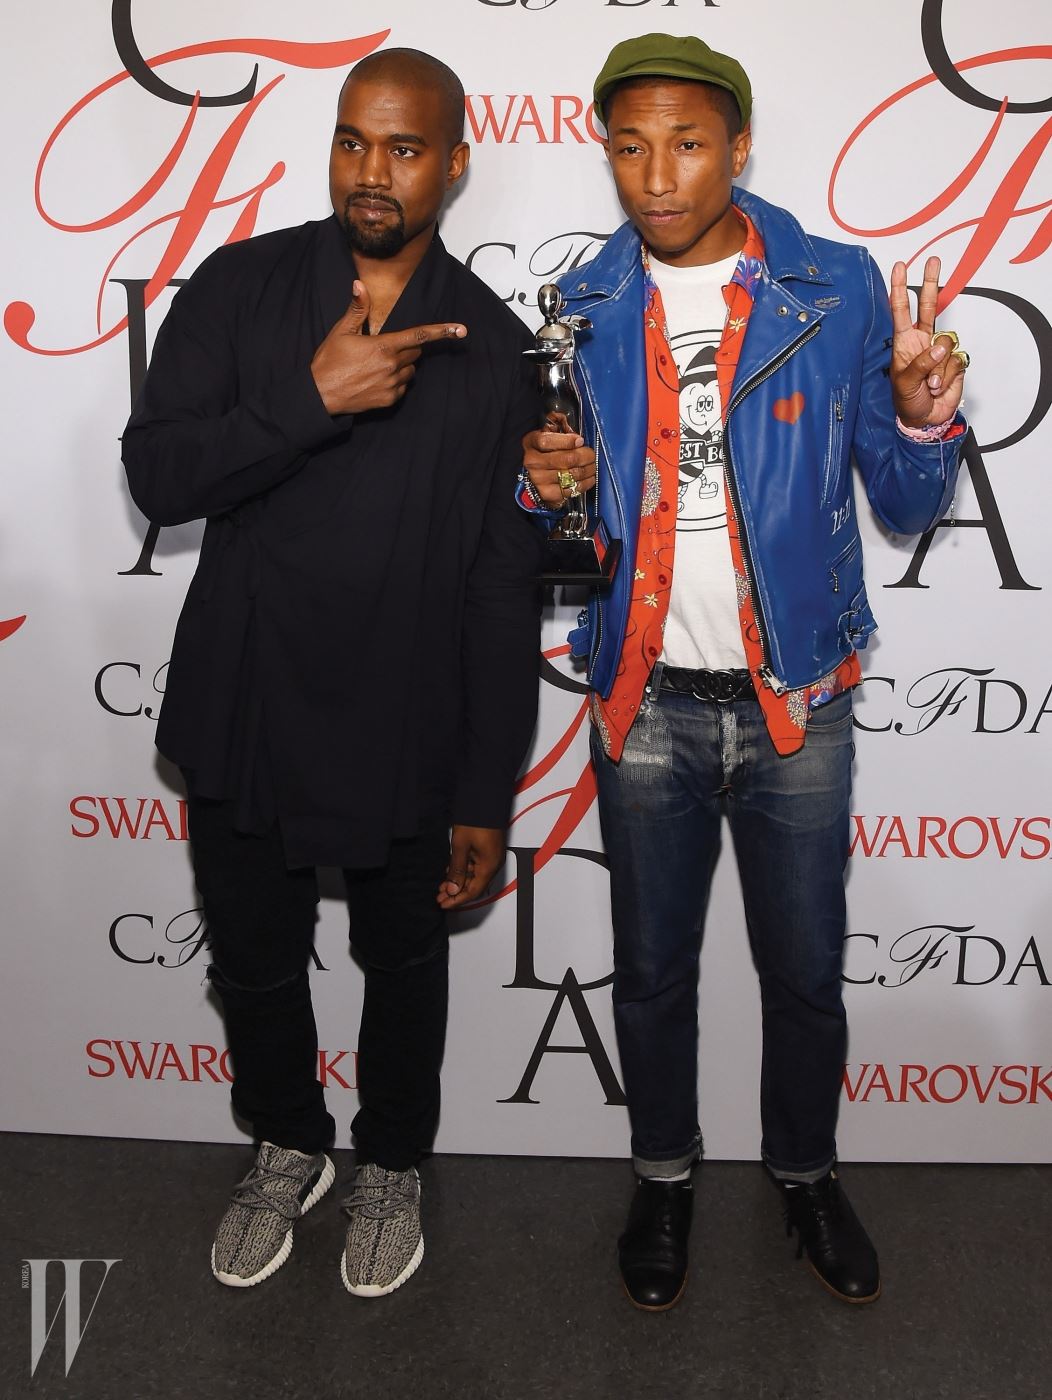 NEW YORK, NY - JUNE 01:  Rapper Kanye West and singer Pharrell Williams pose on the winners walk at the 2015 CFDA Fashion Awards at Alice Tully Hall at Lincoln Center on June 1, 2015 in New York City.  (Photo by Larry Busacca/Getty Images)